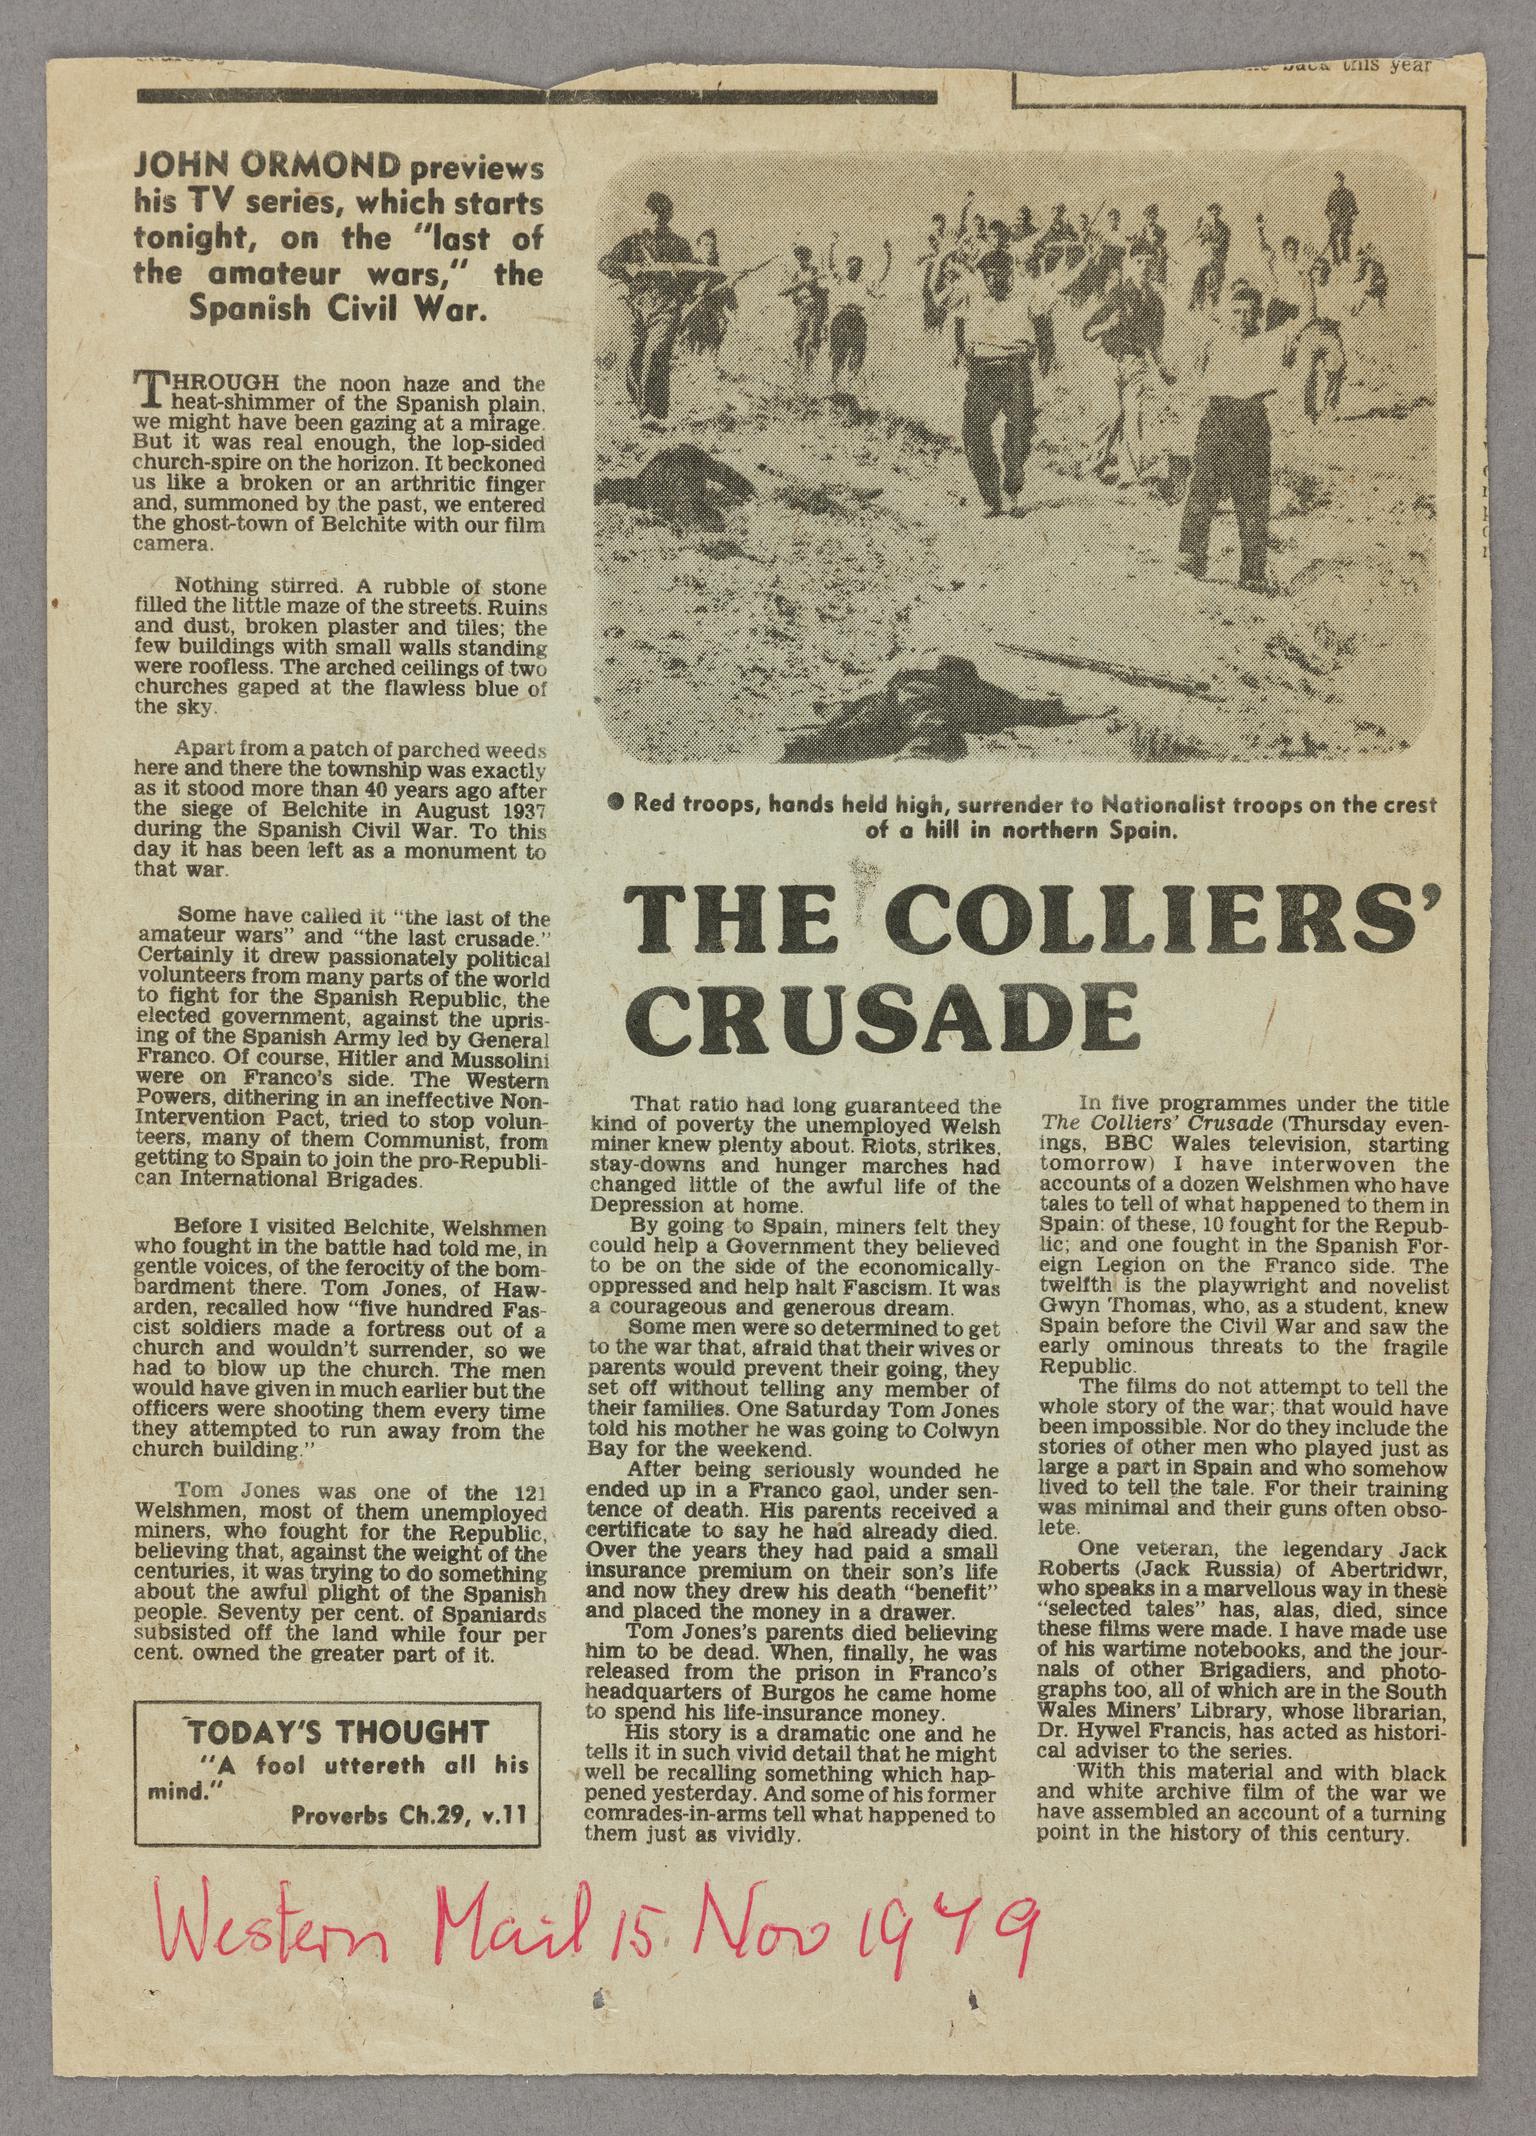 The Colliers' Crusade (article)